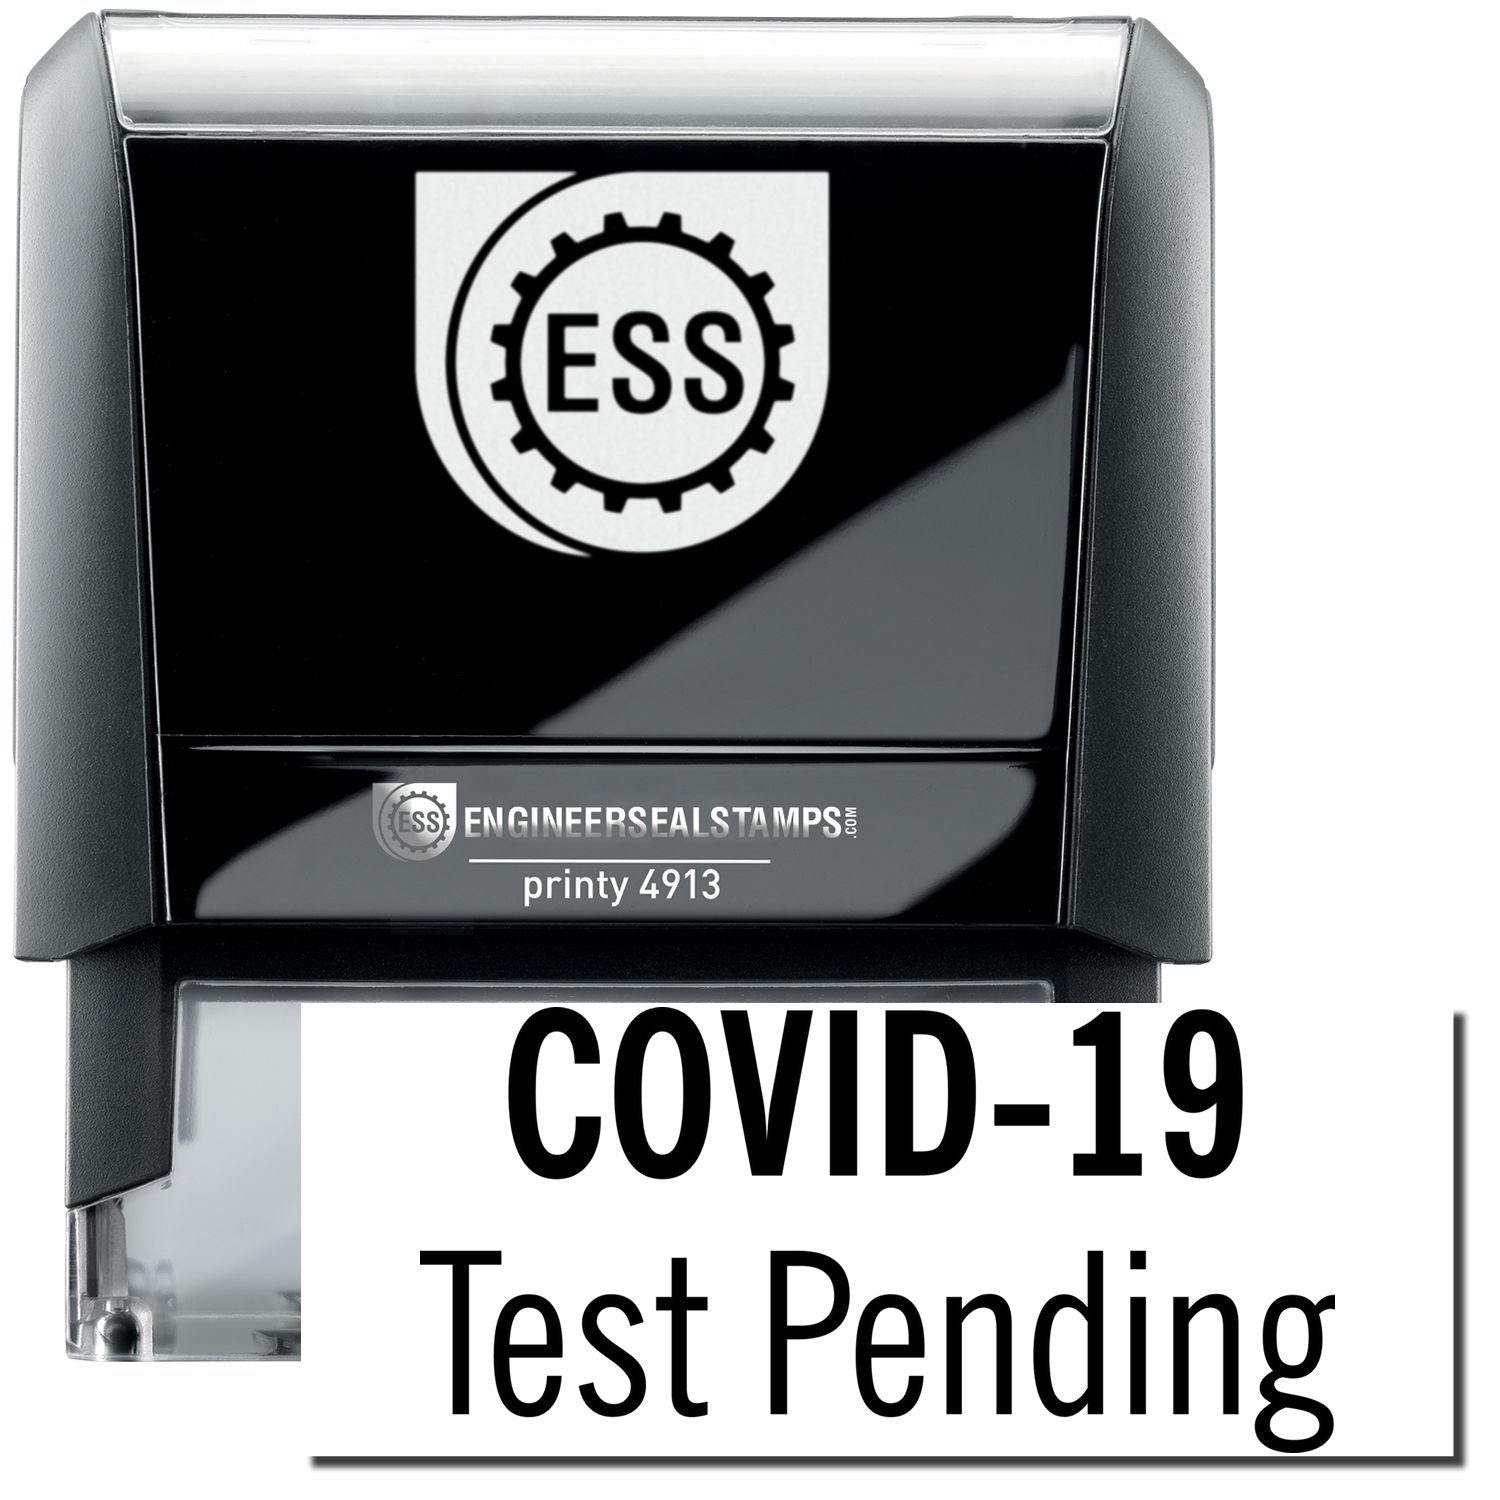 A self-inking stamp with a stamped image showing how the text "COVID-19 Test Pending" in a large font is displayed by it after stamping.